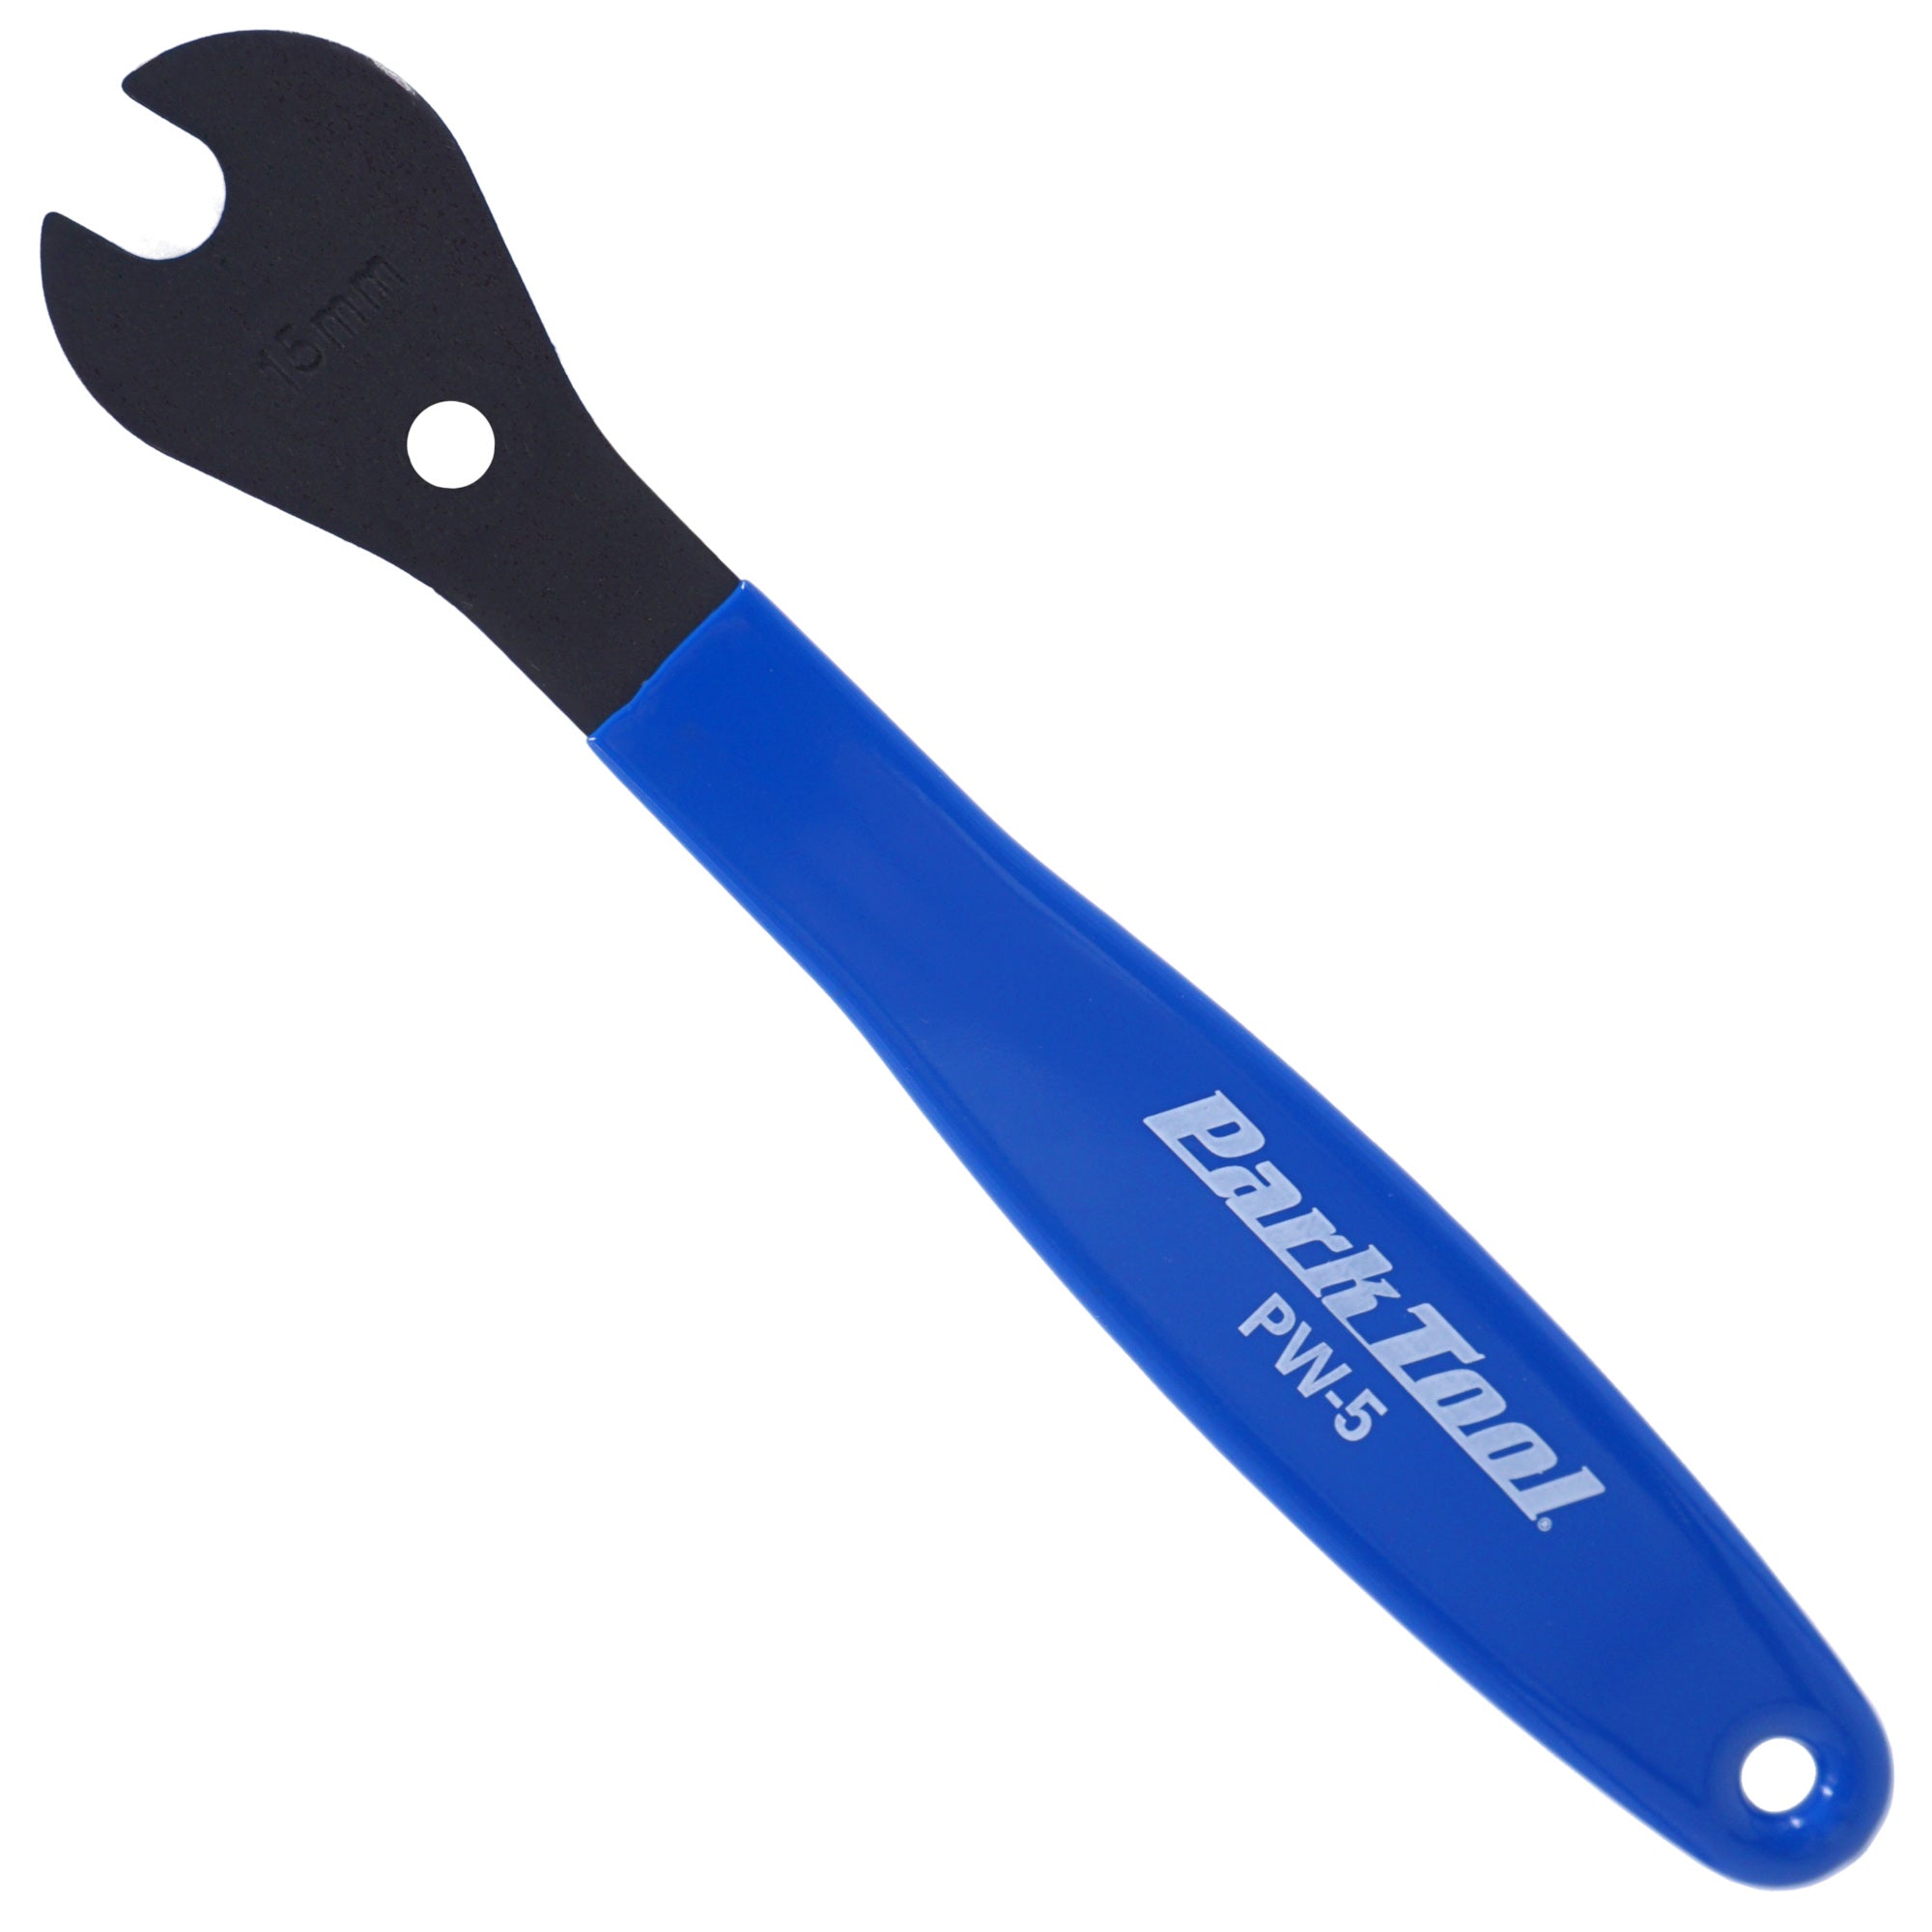 Park Tool PW-5 15mm Bicycle Pedal Wrench - The Bikesmiths